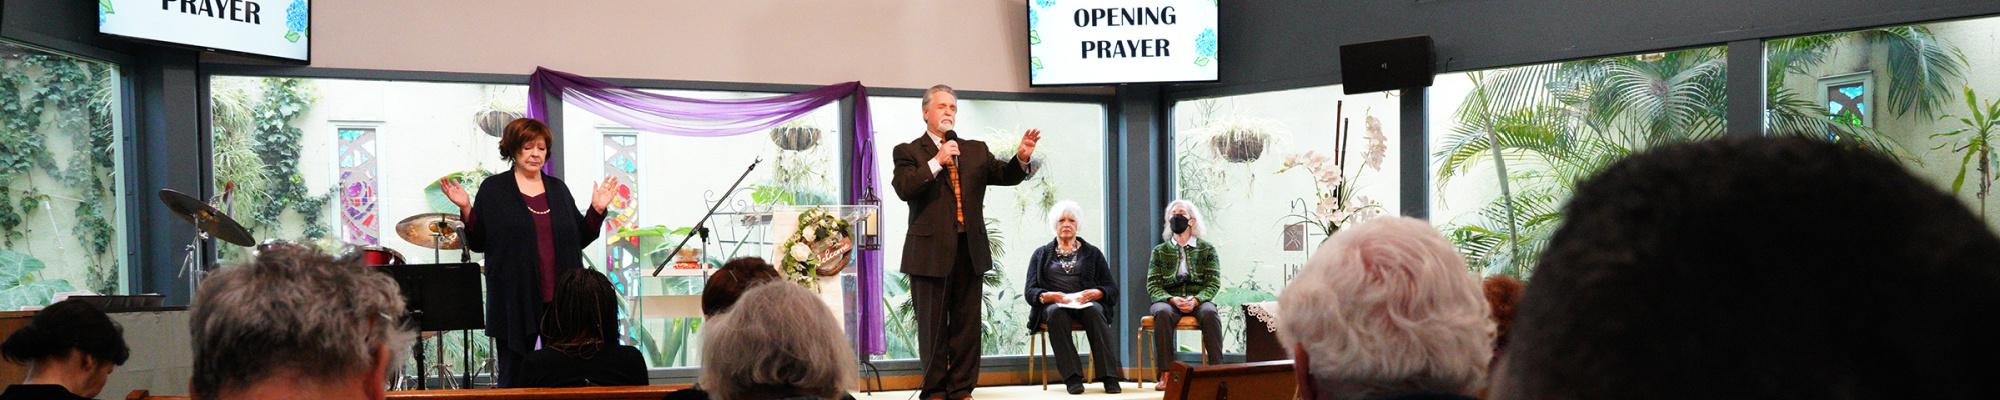 Image shows our sanctuary during a Sunday service. Rev Greg is giving an opening prayer while our lead prayer chaplain, Michelle, raises her hands while holding space for the prayer. A lush, green atrium shows behind a wall of windows at the back of the stage. Two large screens show a slide that says "Opening Prayer."